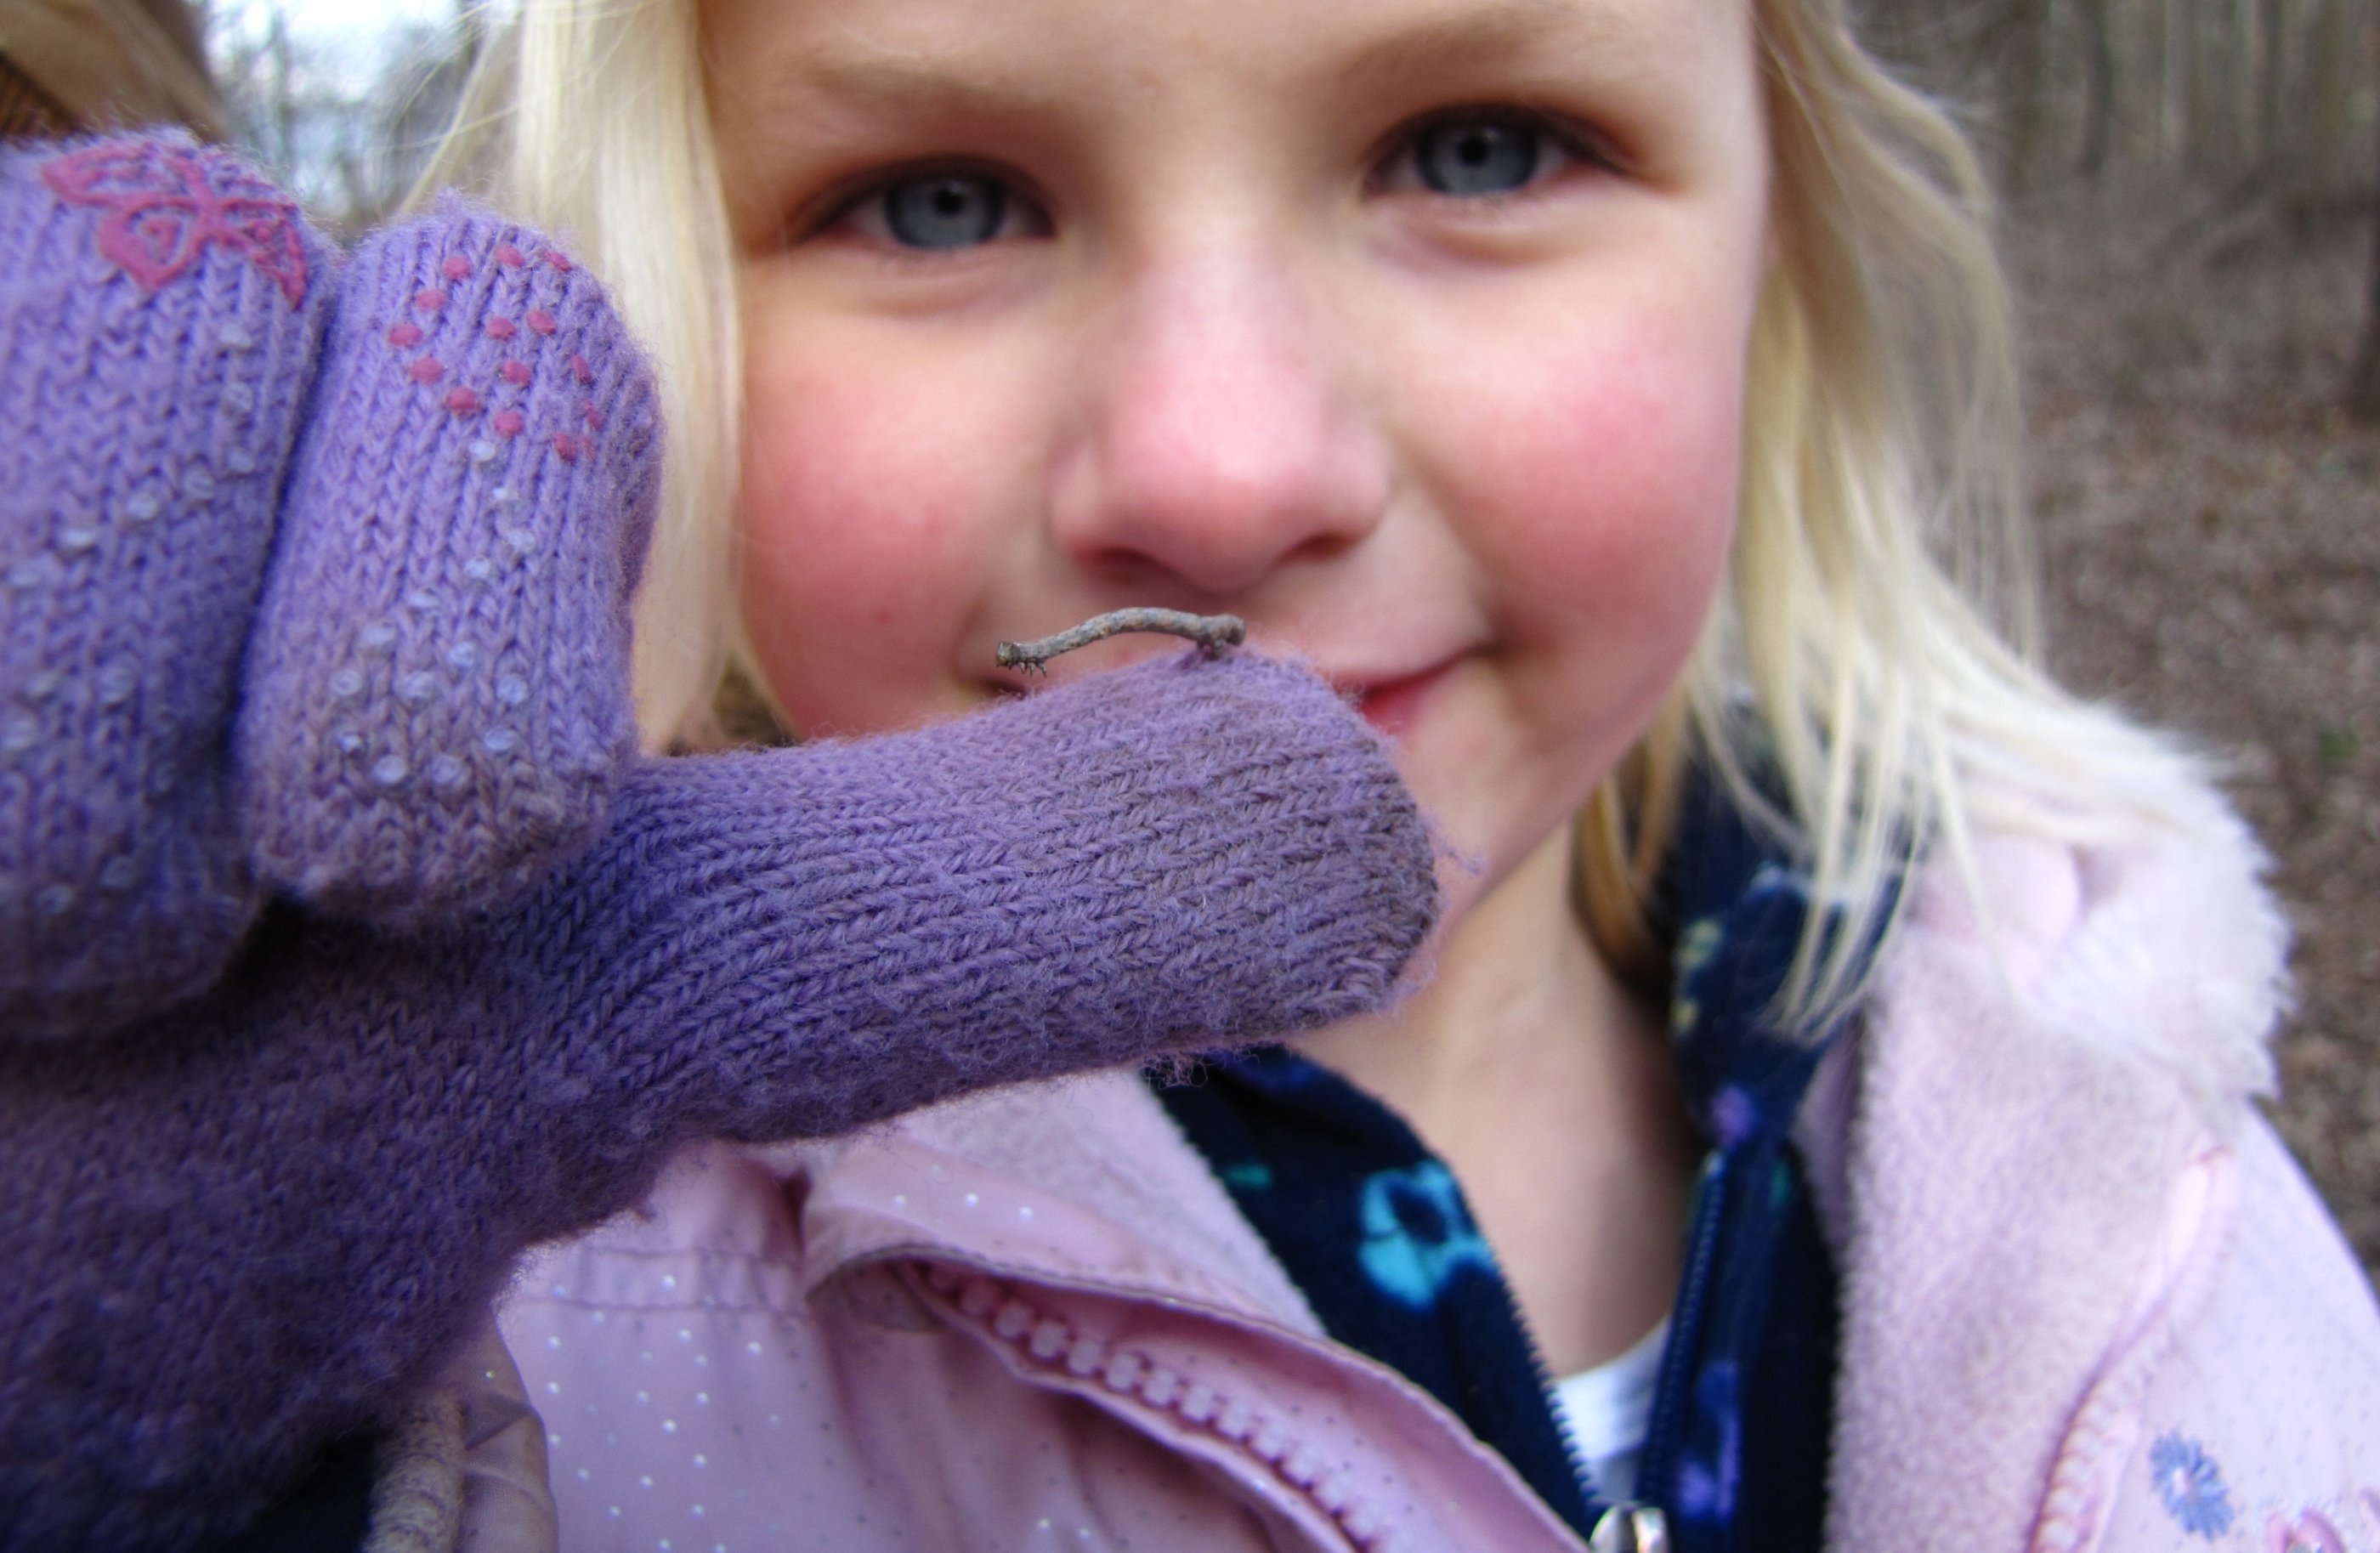 A child holds a small worm on a purple glove.